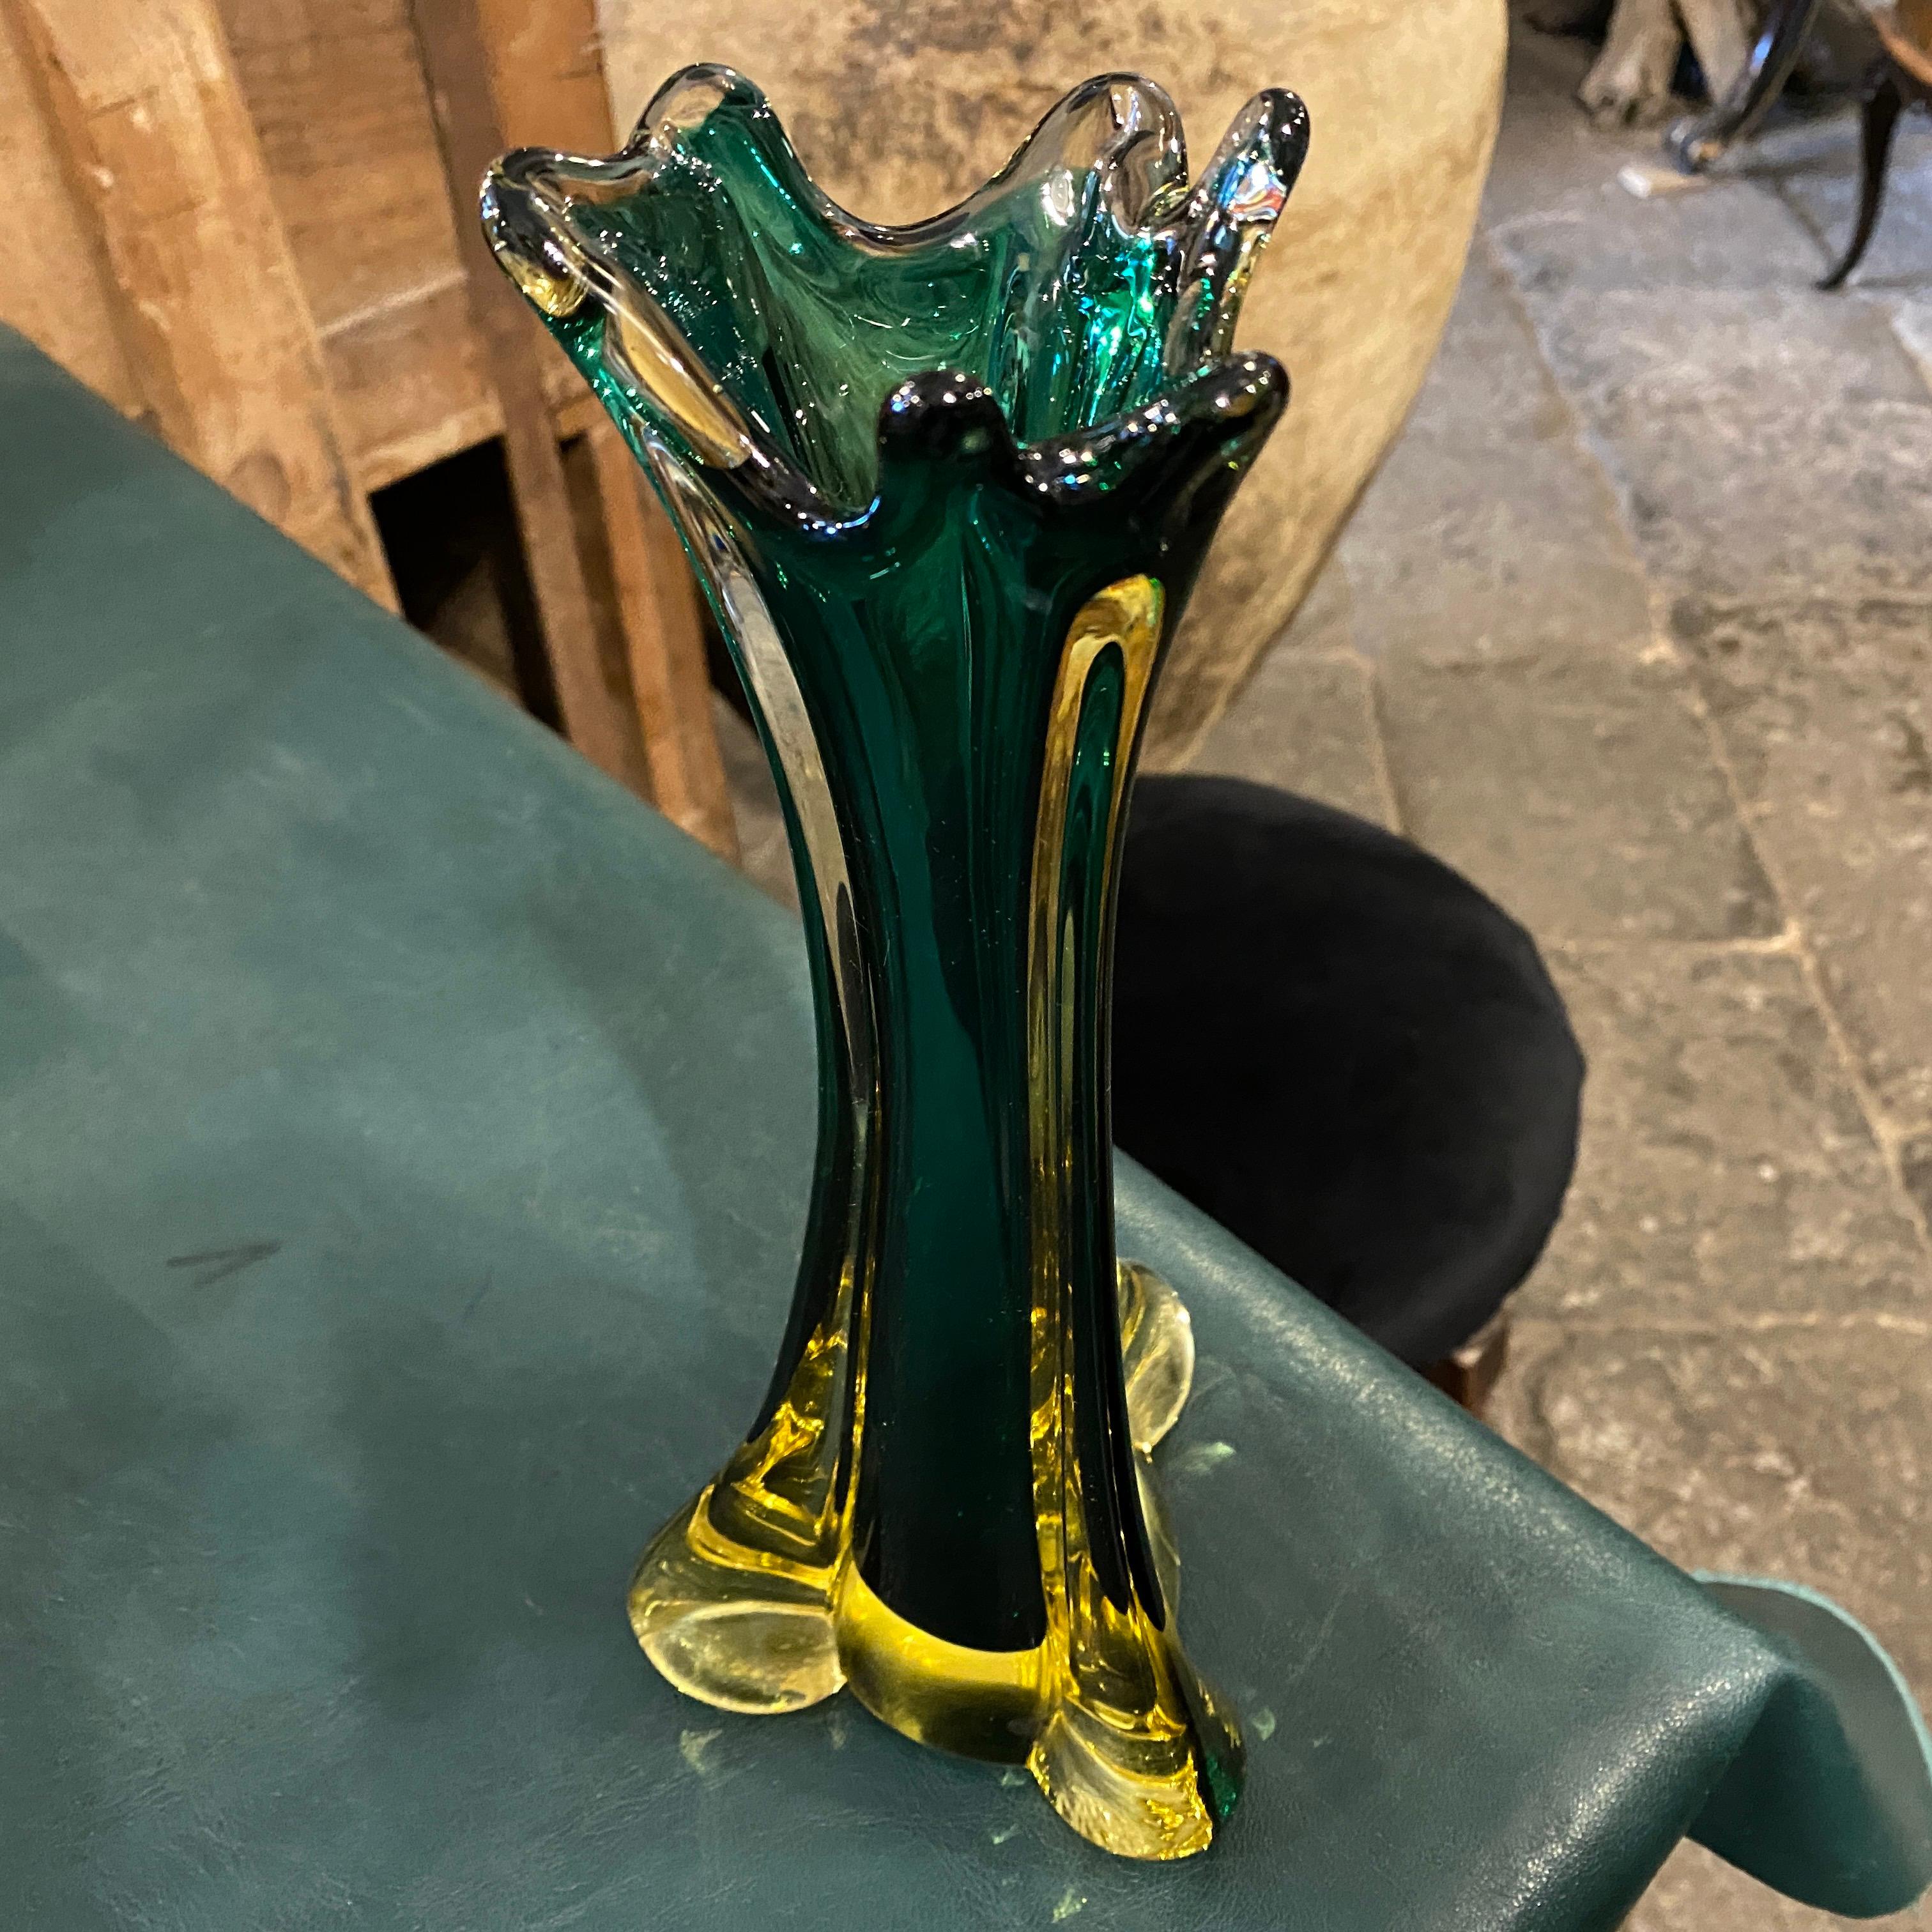 An amazing sommerso murano glass vase in perfect conditions. It has been designed and manufactured in Italy in the Seventies, the combination of yellow and green color gives it a superb vintage effect. Seguso is a renowned Murano glassmaker, the